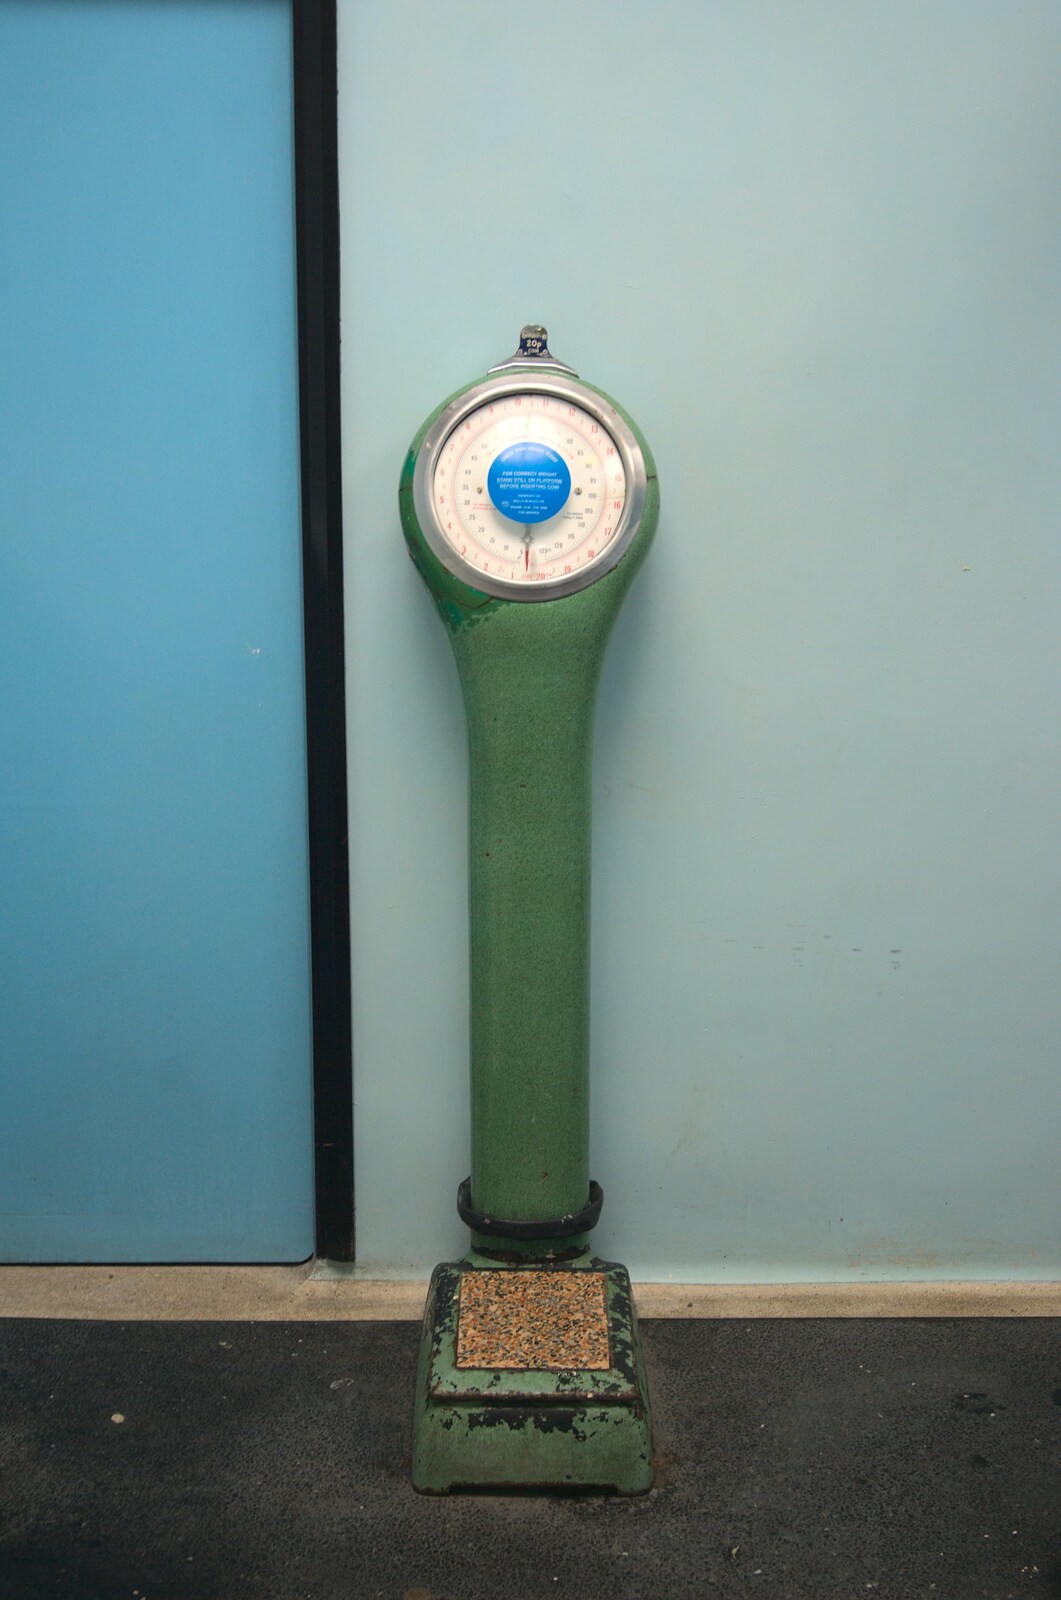 Old-school weighing scales in the public bogs from A Camper Van Odyssey: Charmouth, Plymouth, Dartmoor and Bath - 20th June 2011